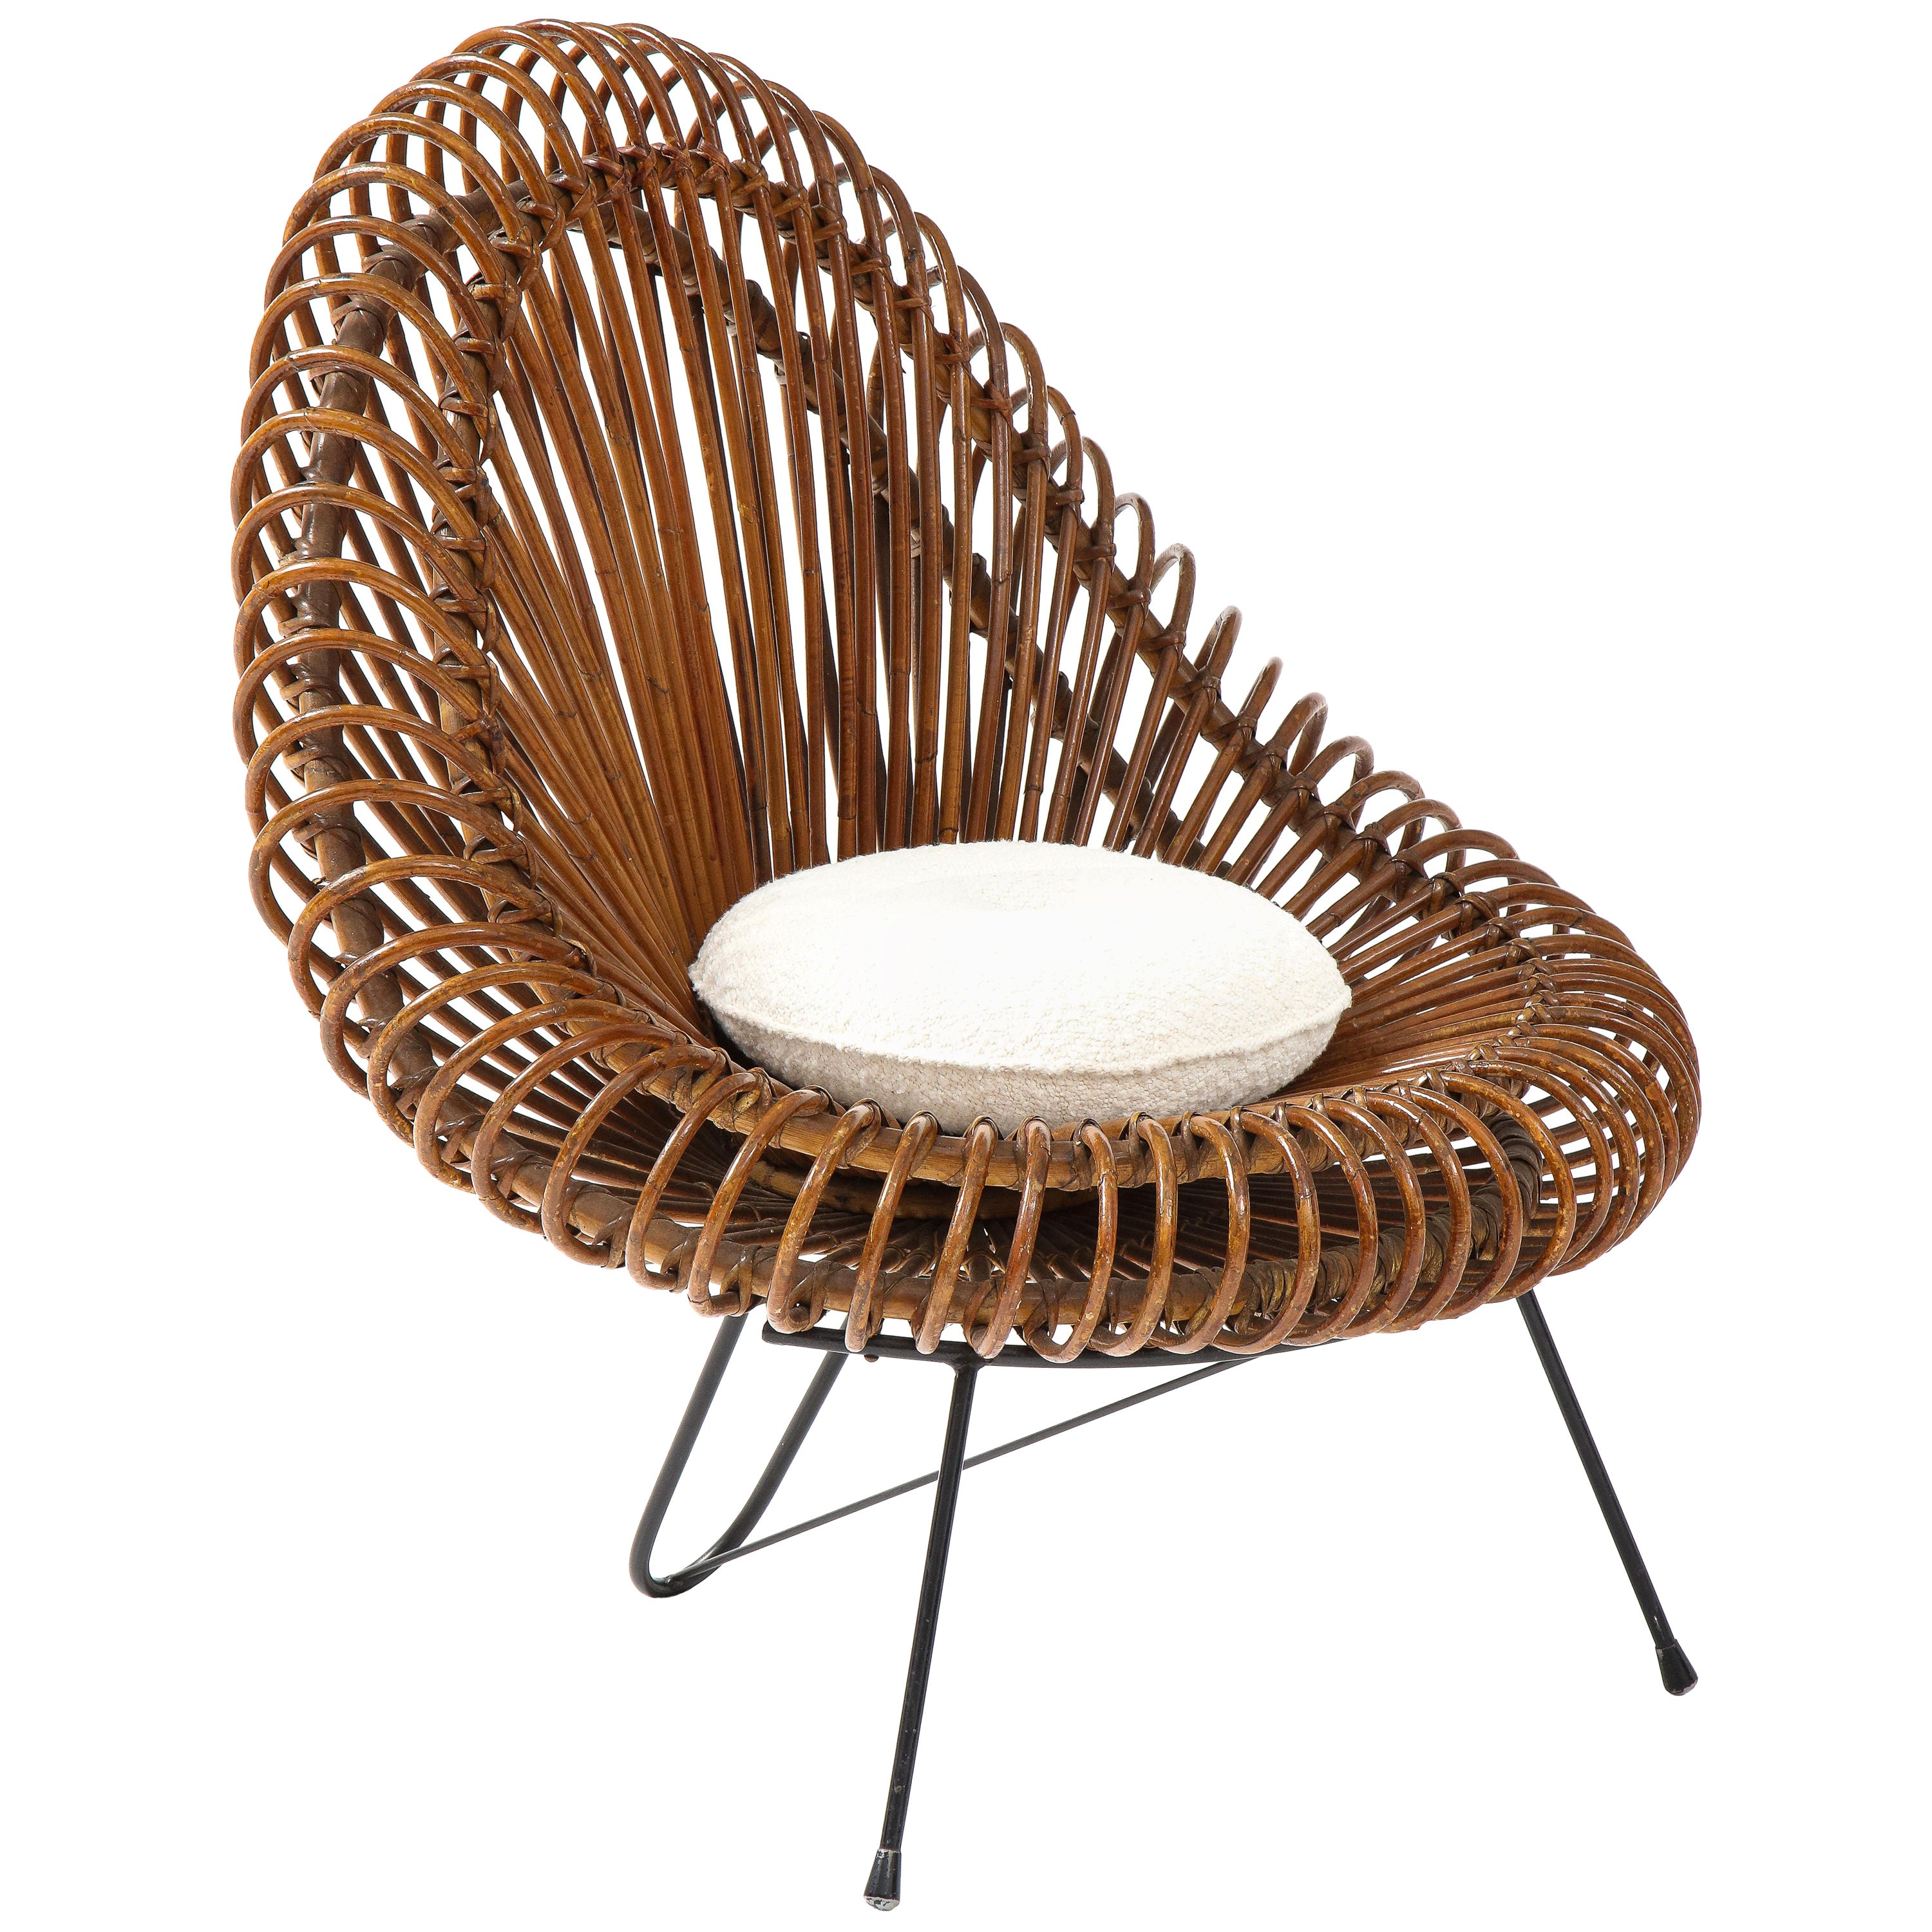 Janine Abraham and Dirk Jan Rol Sculptural Rattan Lounge Chair, France, 1950s For Sale